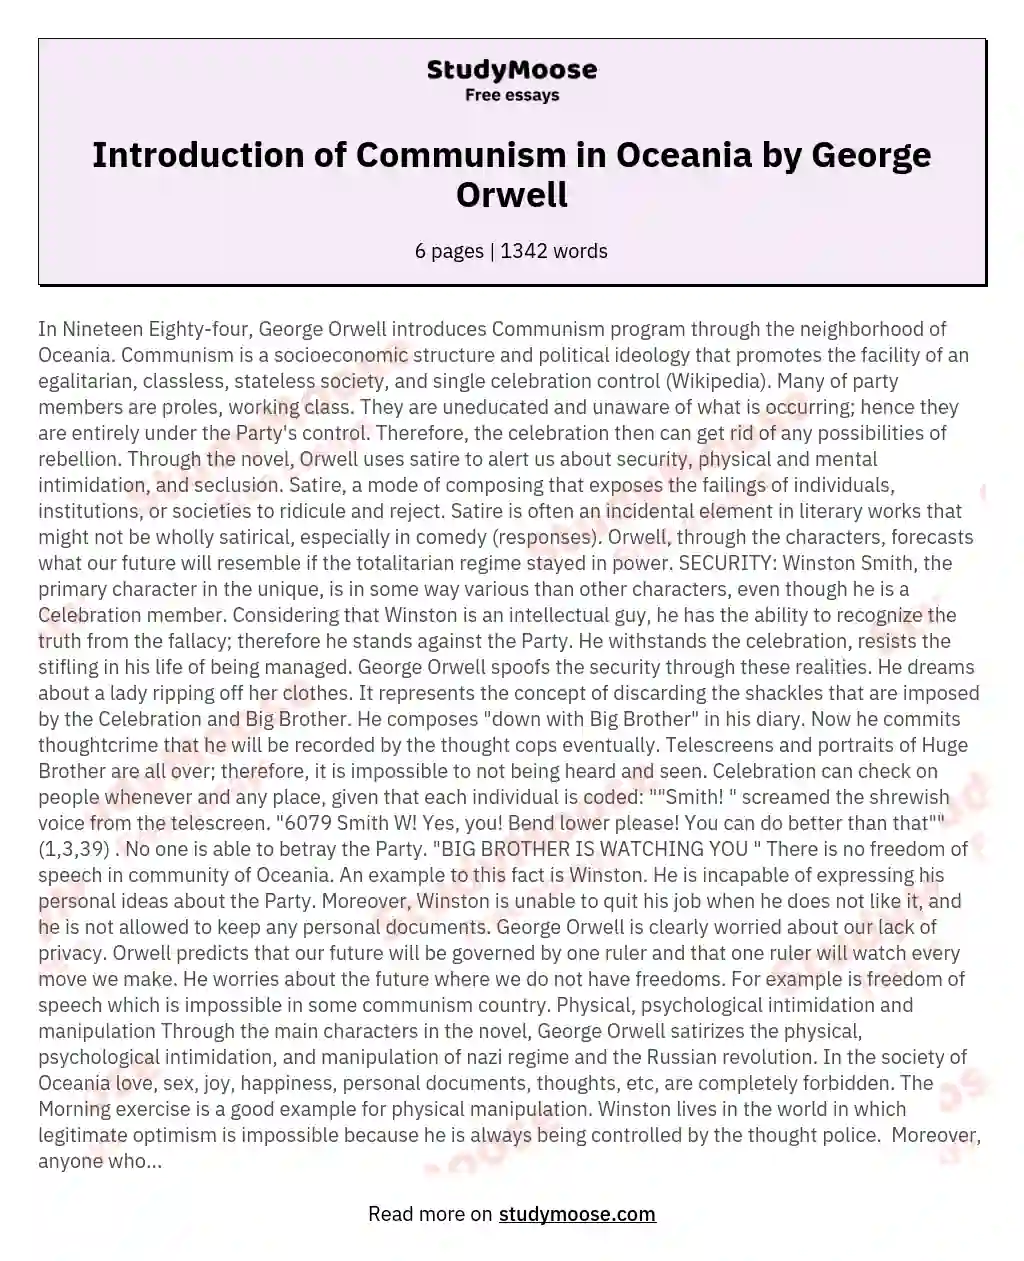 Introduction of Communism in Oceania by George Orwell essay